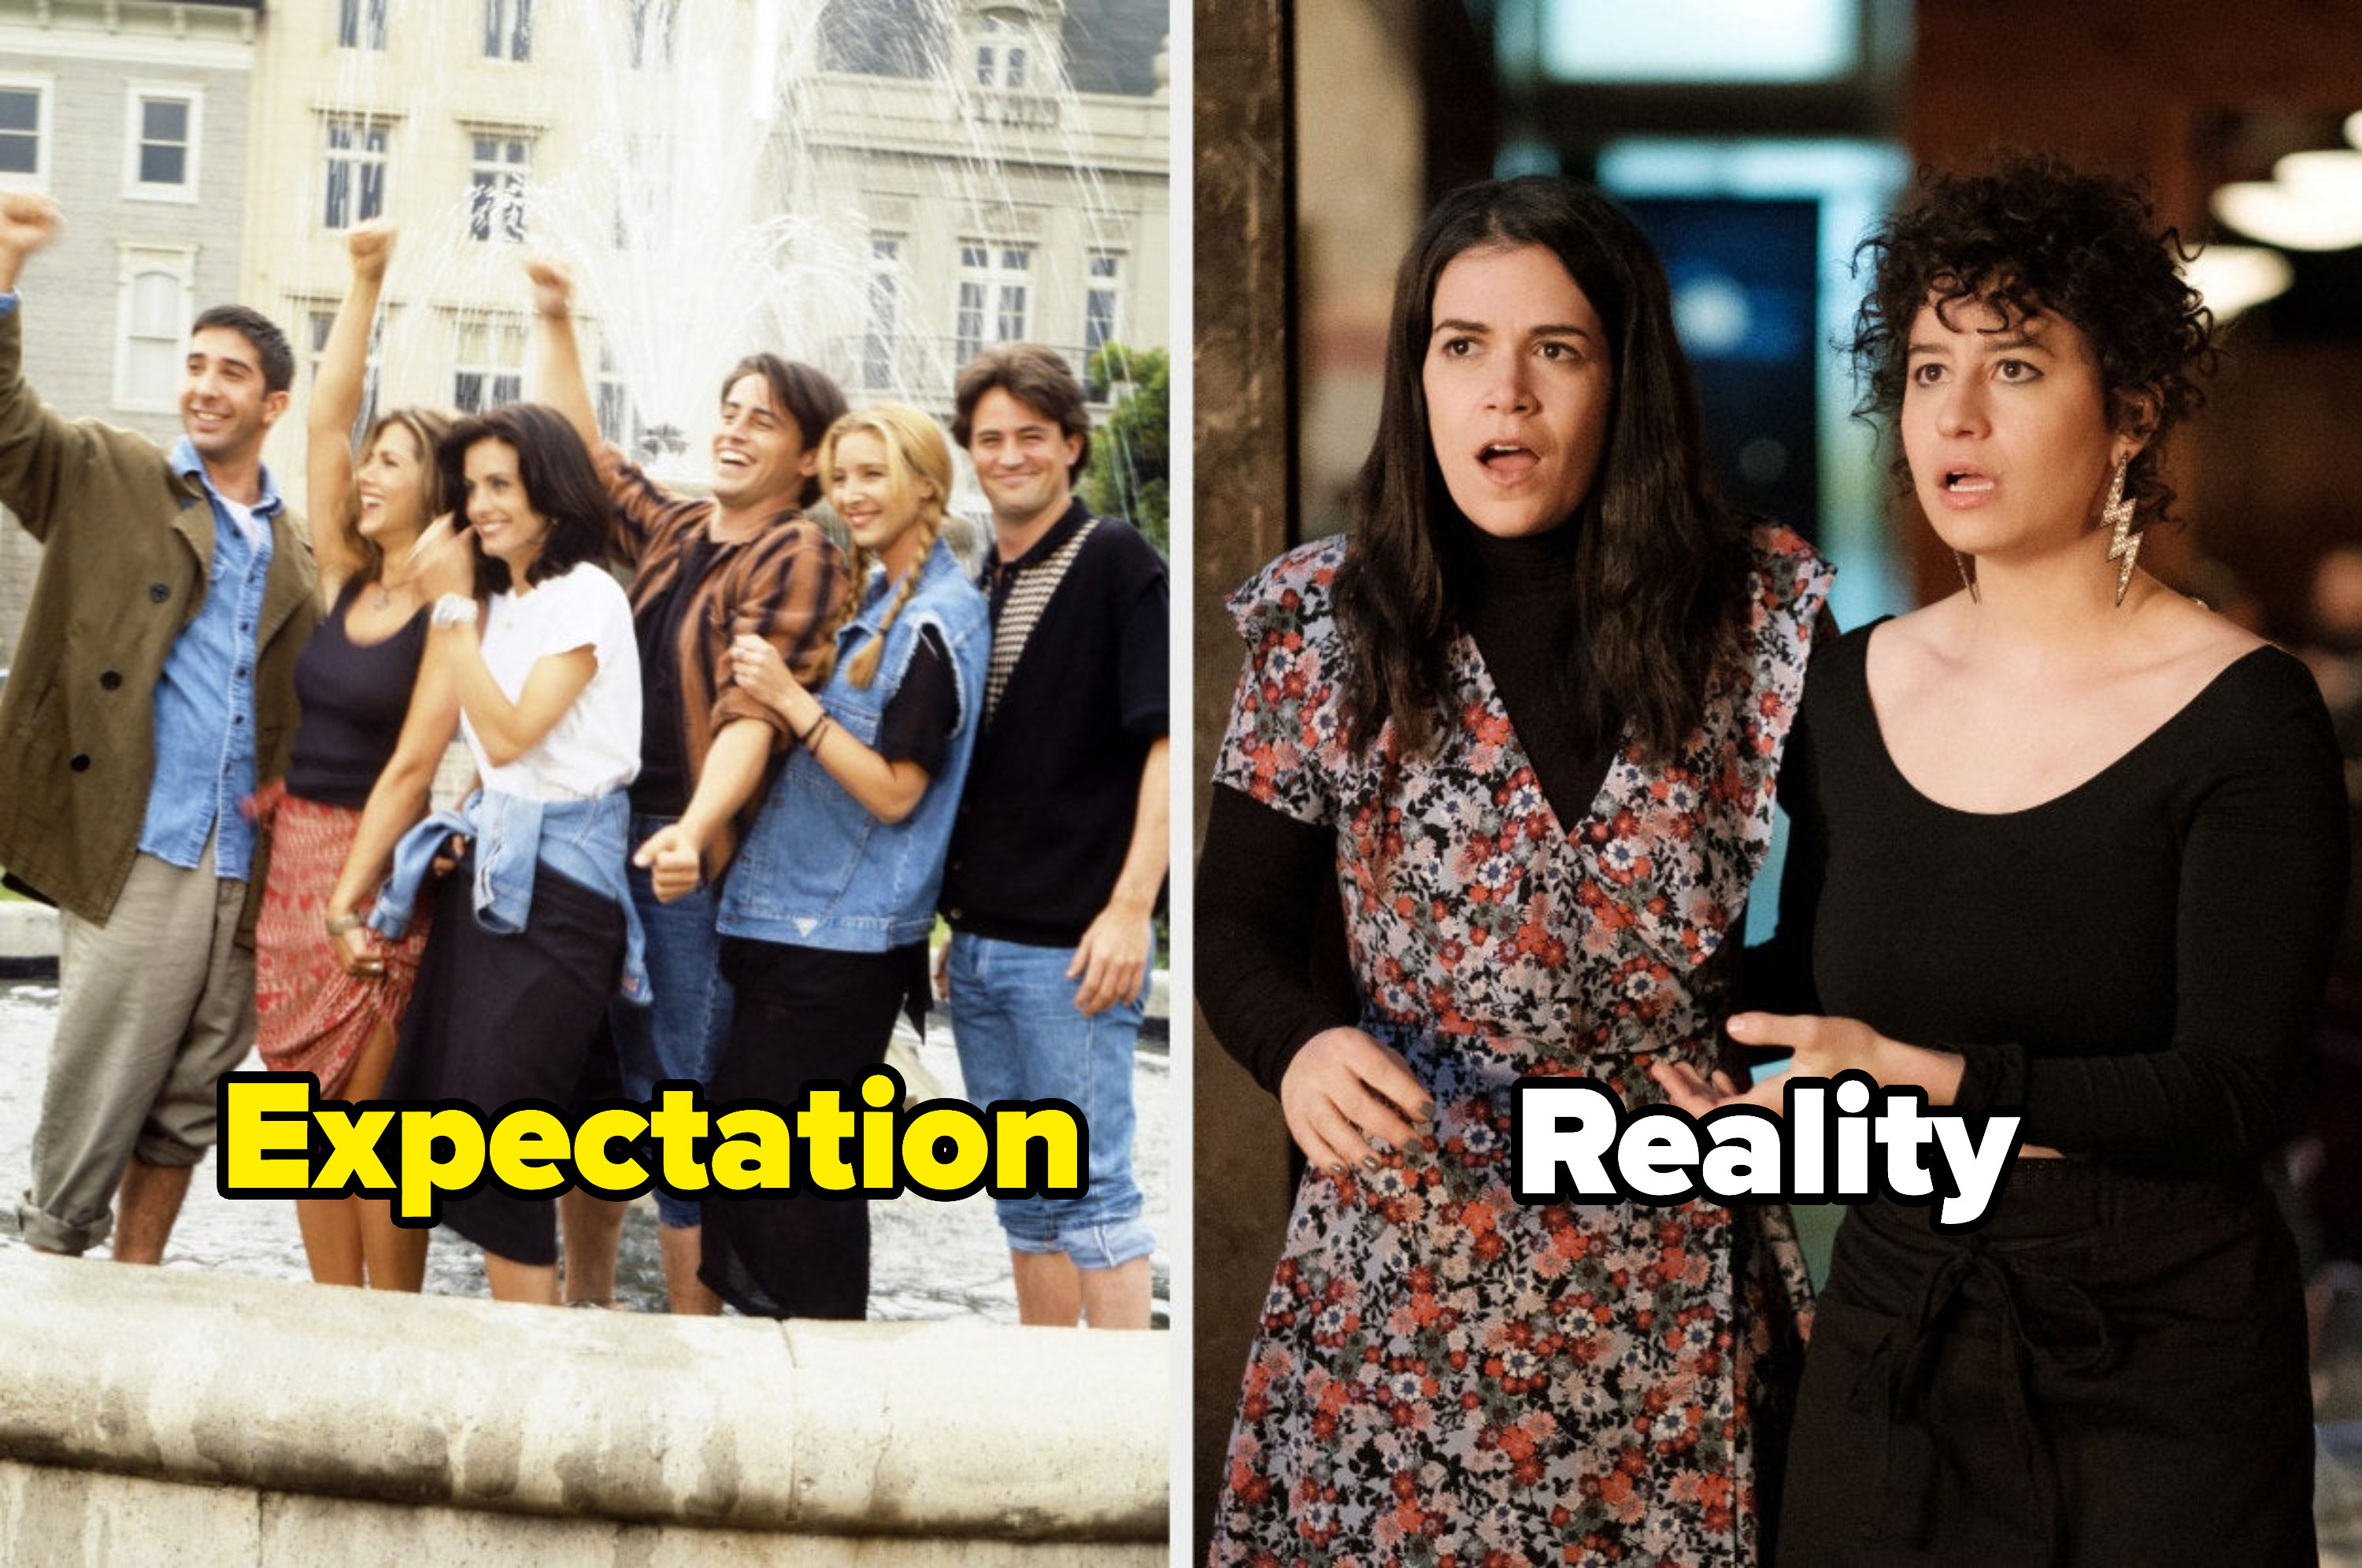 the expectation of being like the cast of Friends and the reality of having just one close friend like in Broad City